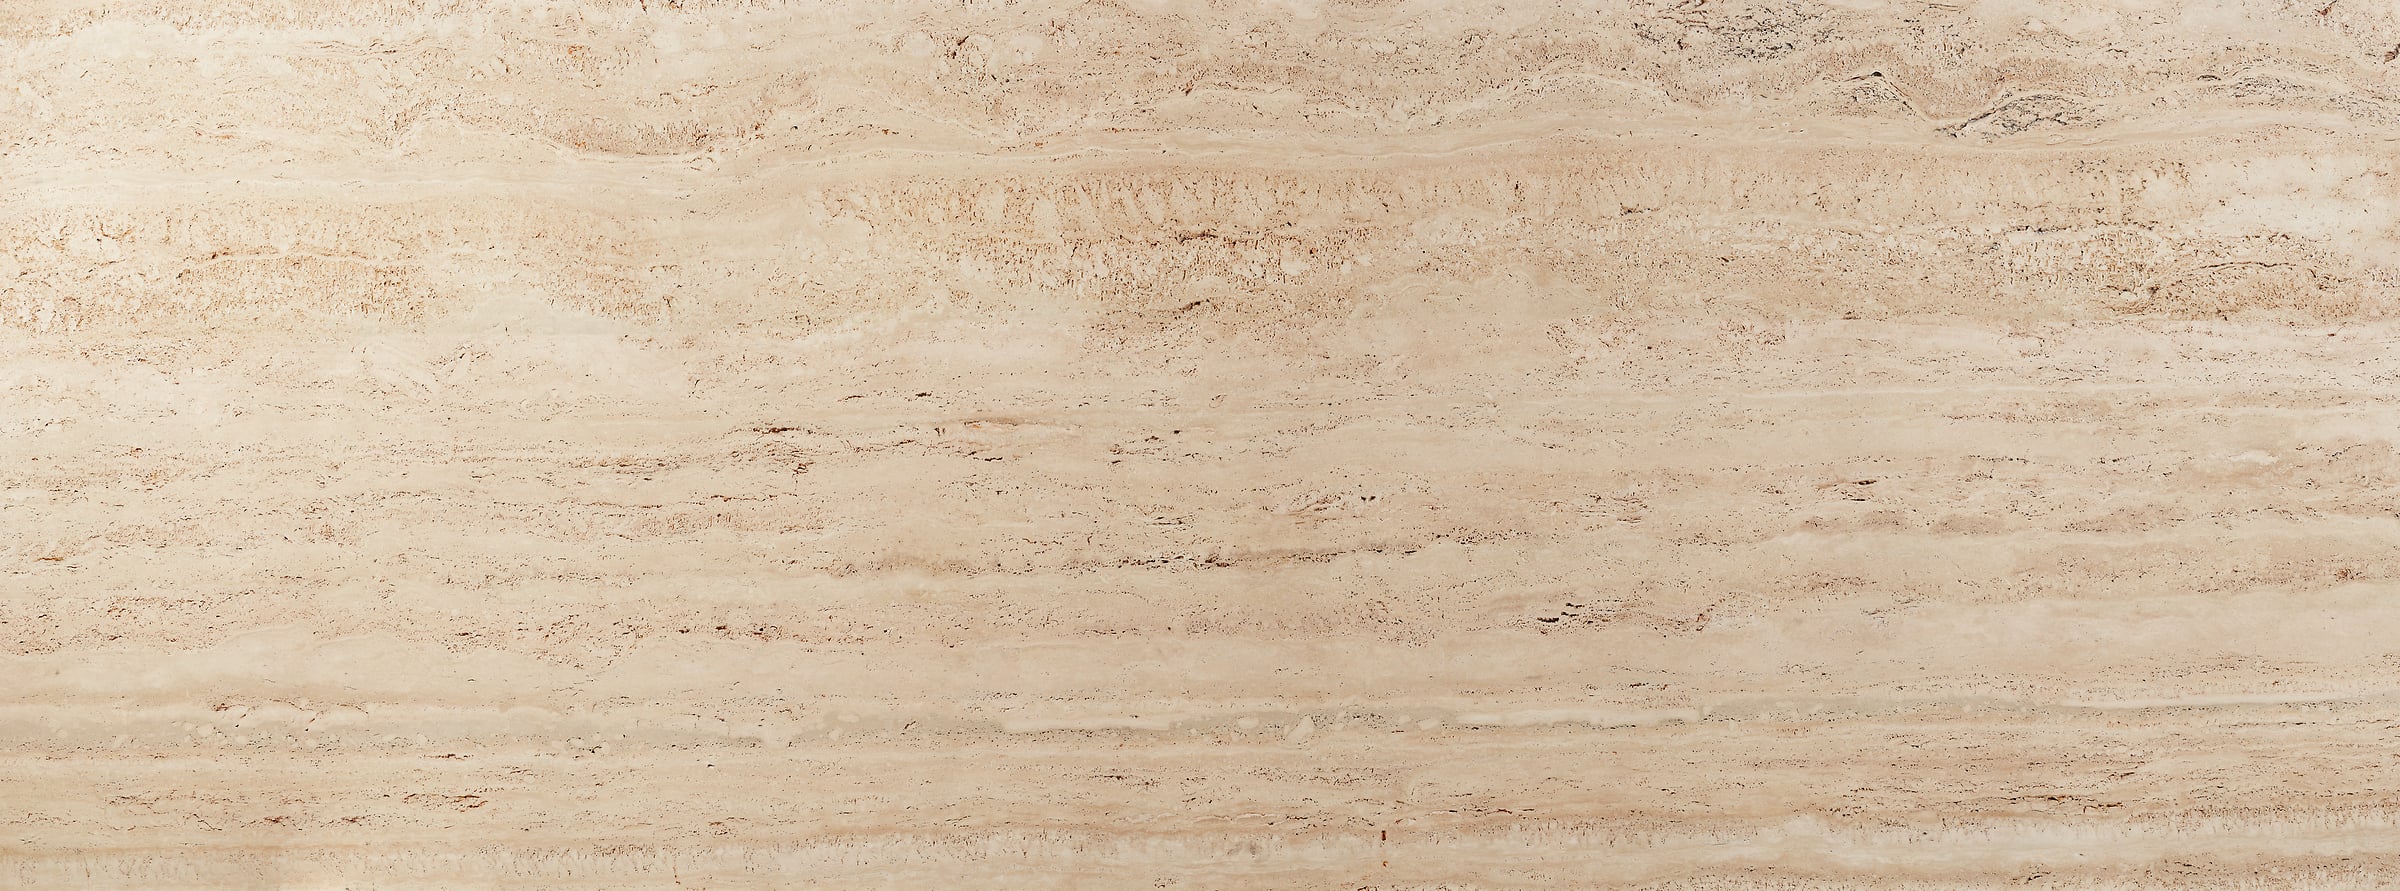 1,521 megapixels! An ultra-high-resolution texture photo file of light travertine limestone; gigapixel photograph created by David Lineton.